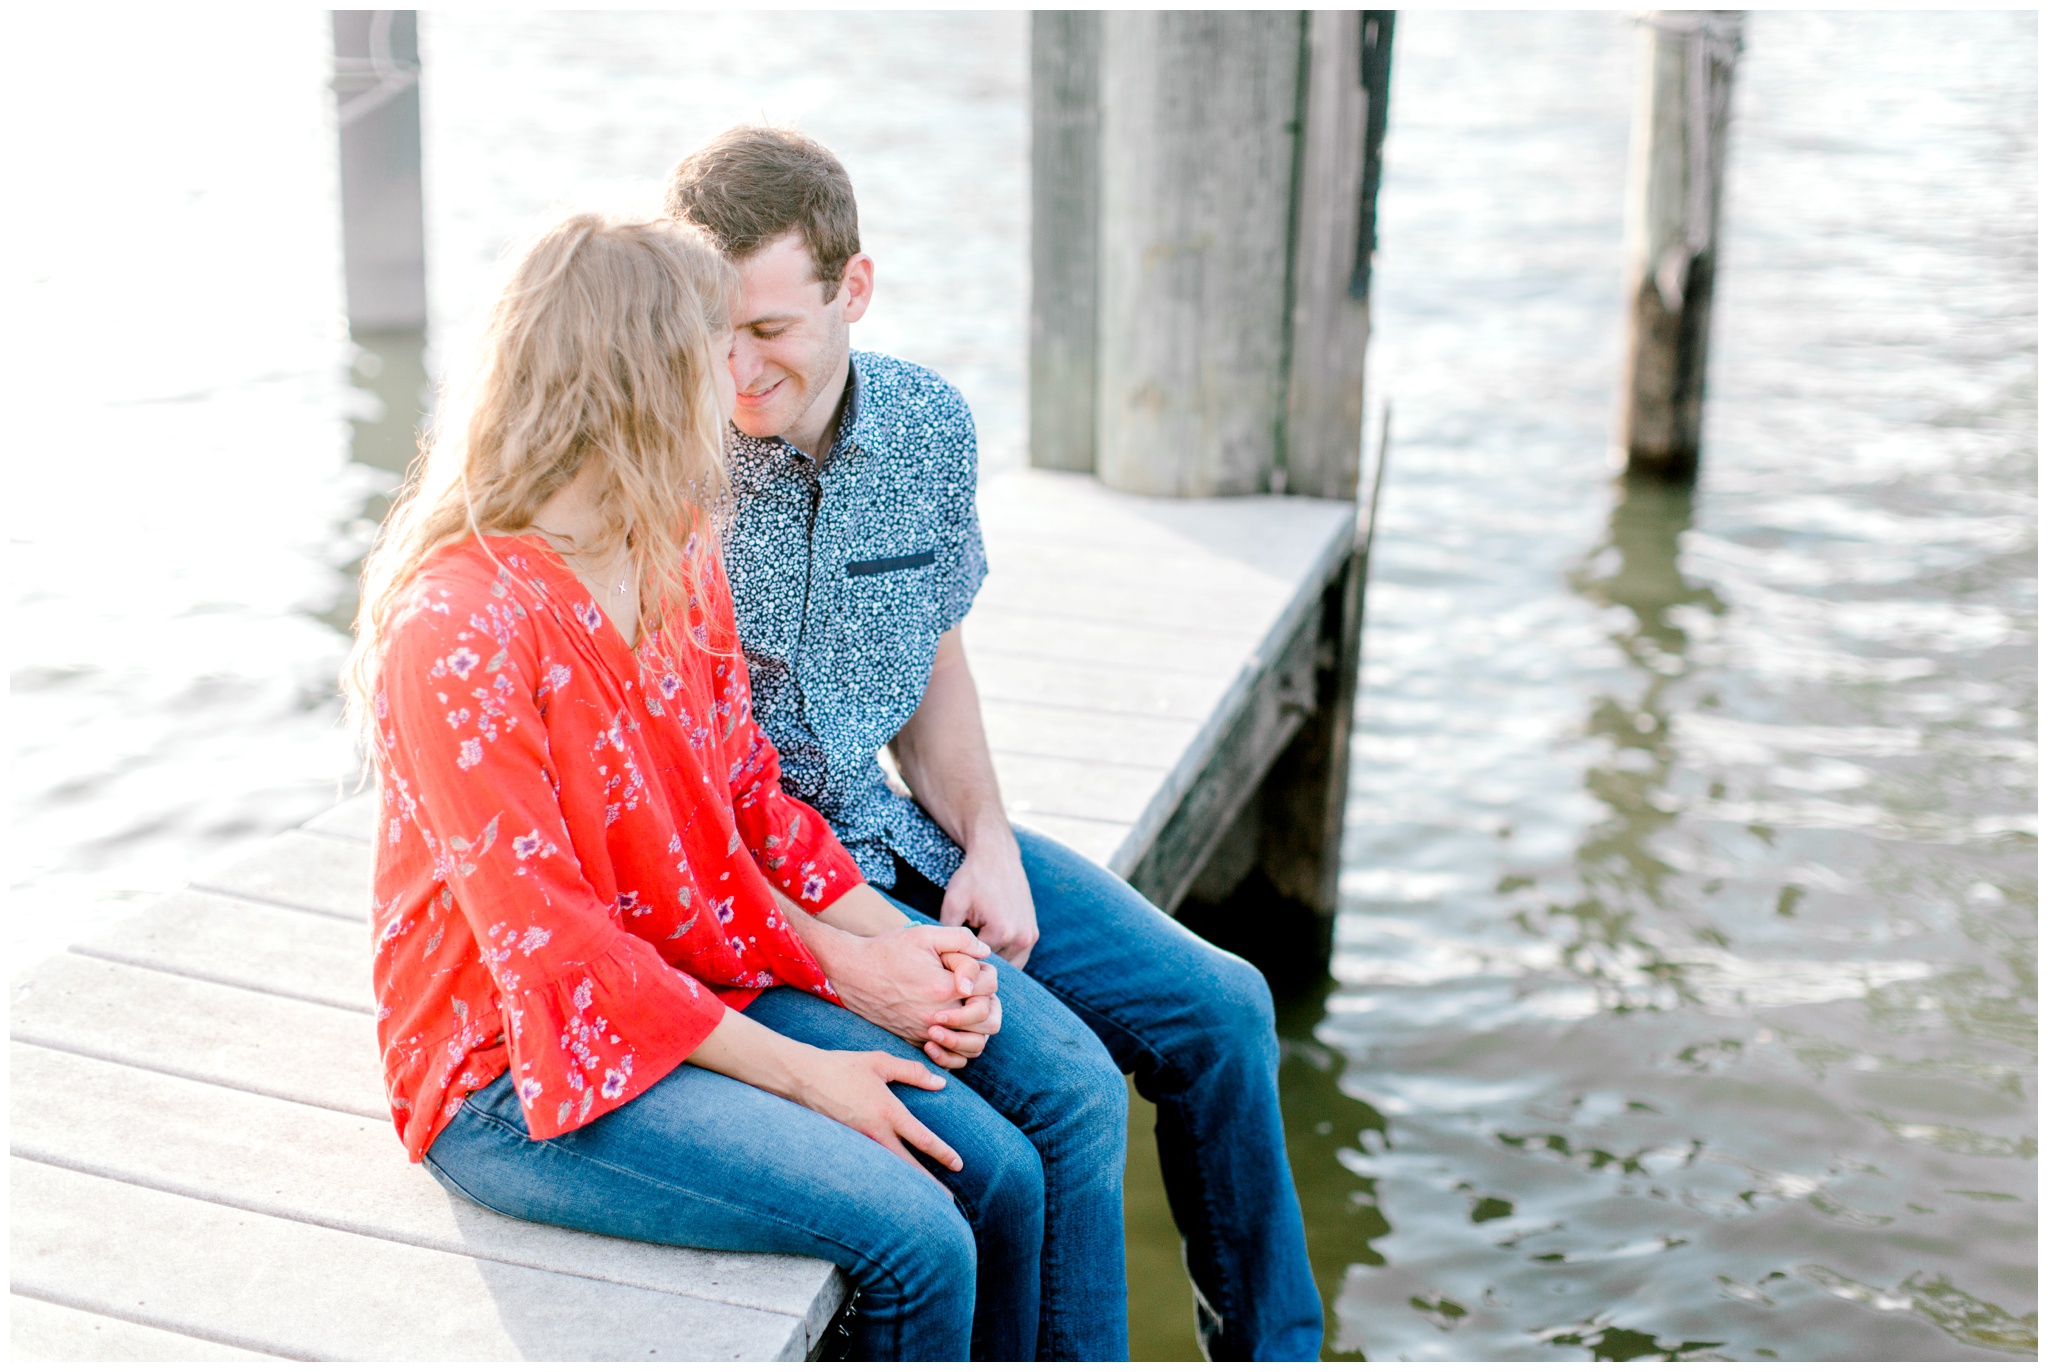 Old town alexandria engagement photos, old town alexandria engagement pictures, old town alexandria photographer, old town alexandria photography, old town alexandria engagement session, engagement photographer, virginia engagement photographer, virginia wedding photographer